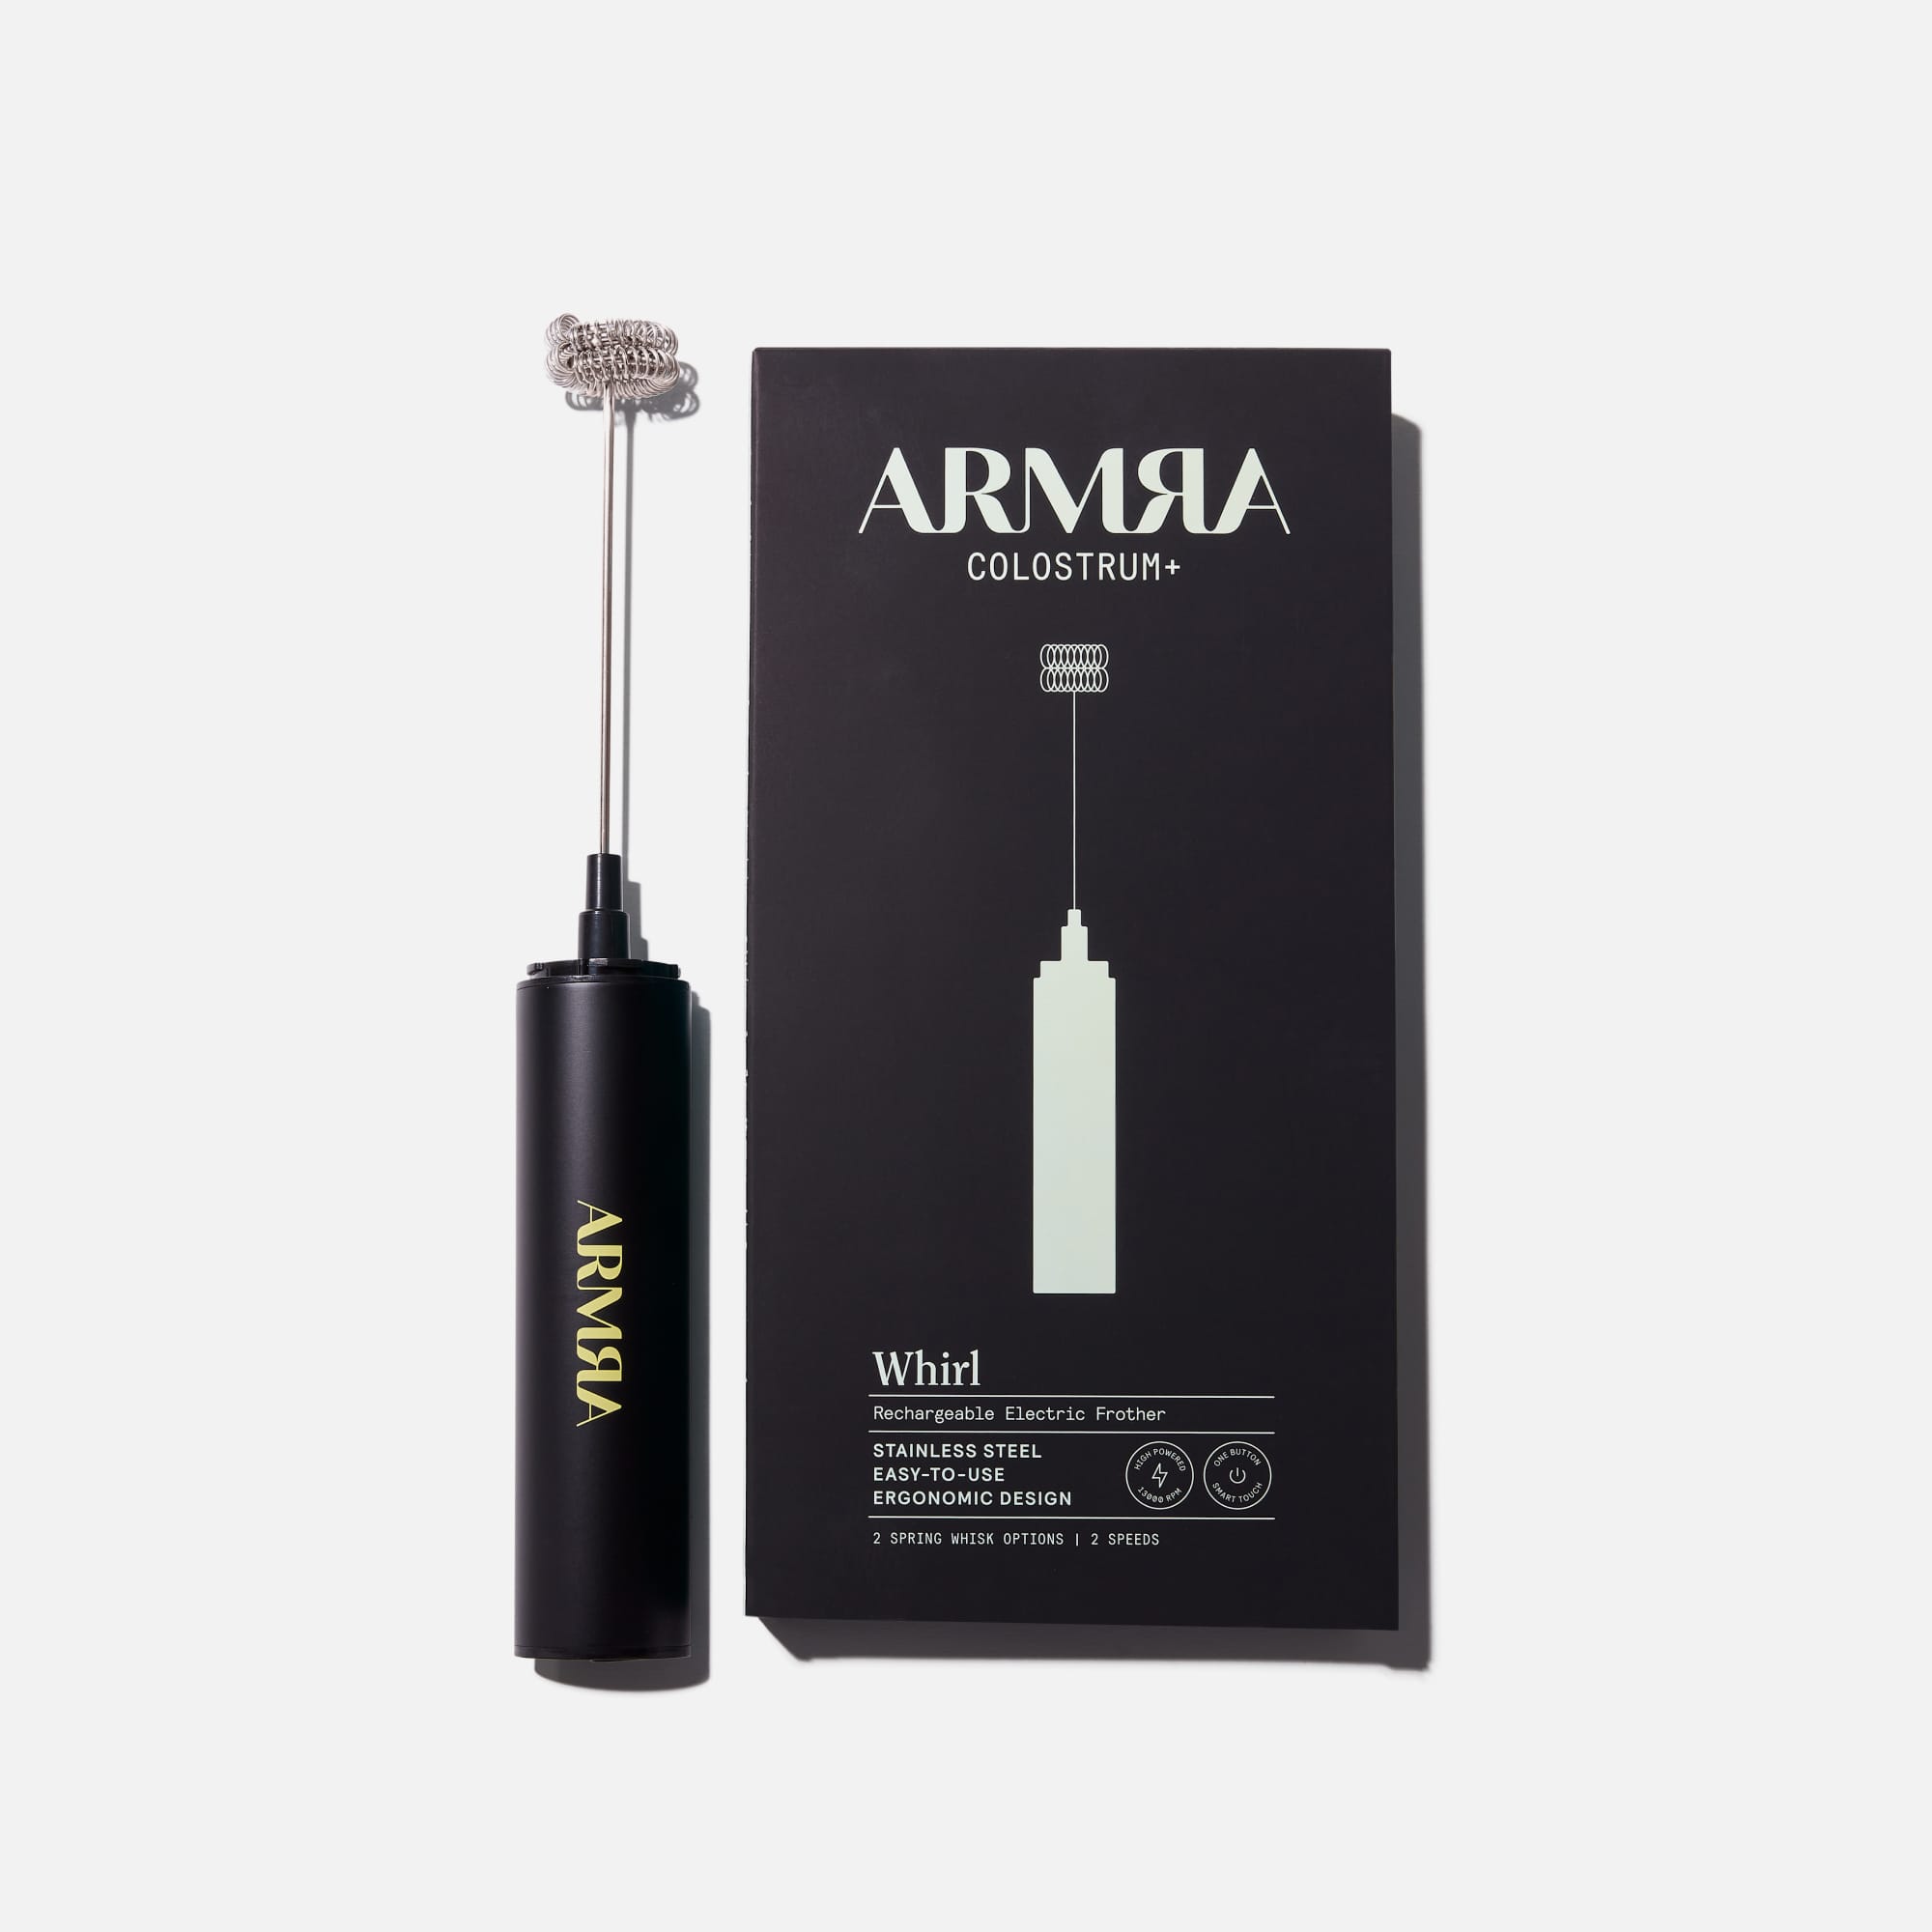 ARMRA Whirl Rechargeable Frother